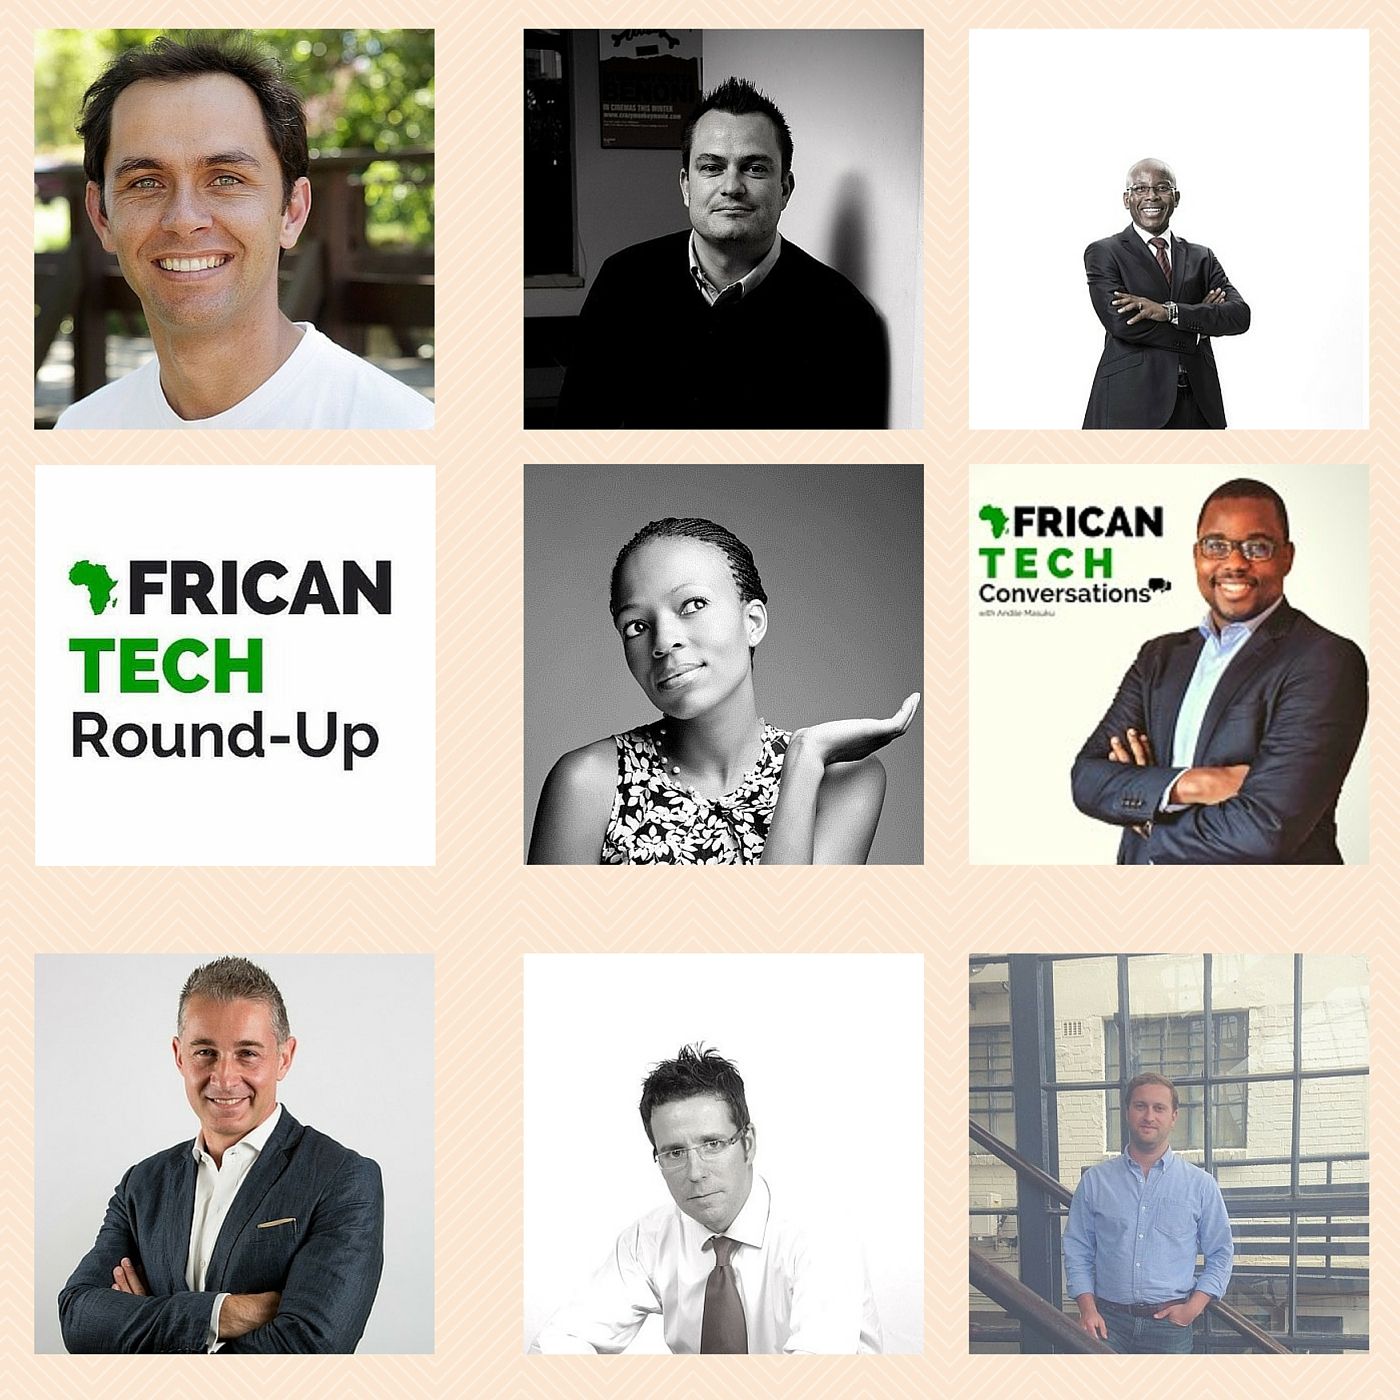 53: A Year of Great African Tech Conversations